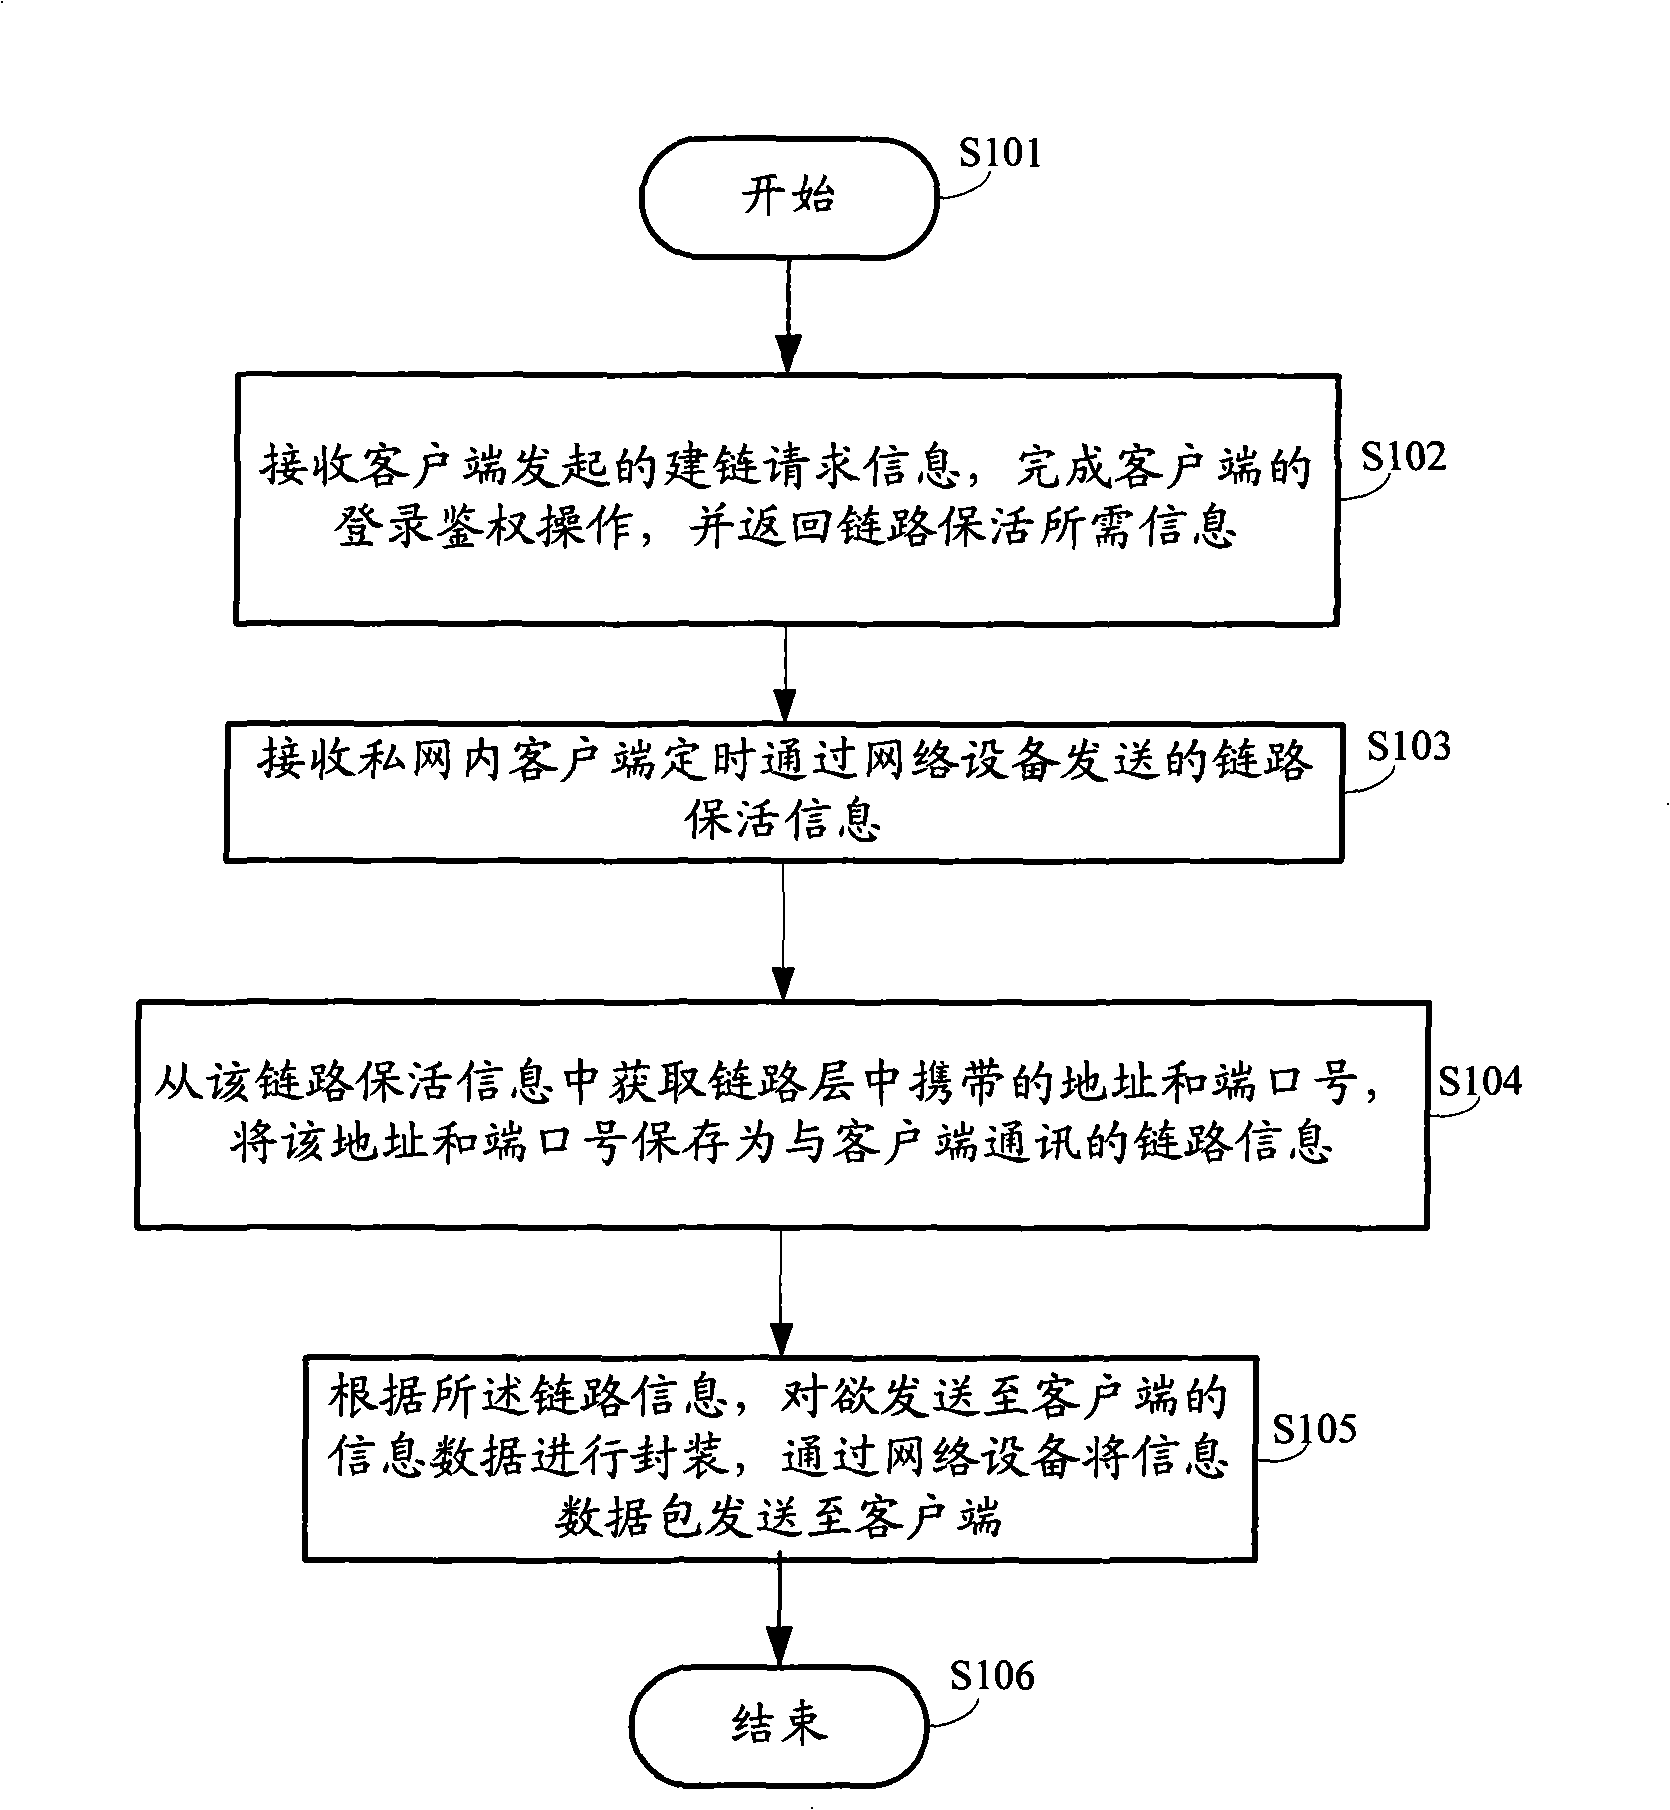 Method for implementing private network penetration of monitoring business, network appliance and server